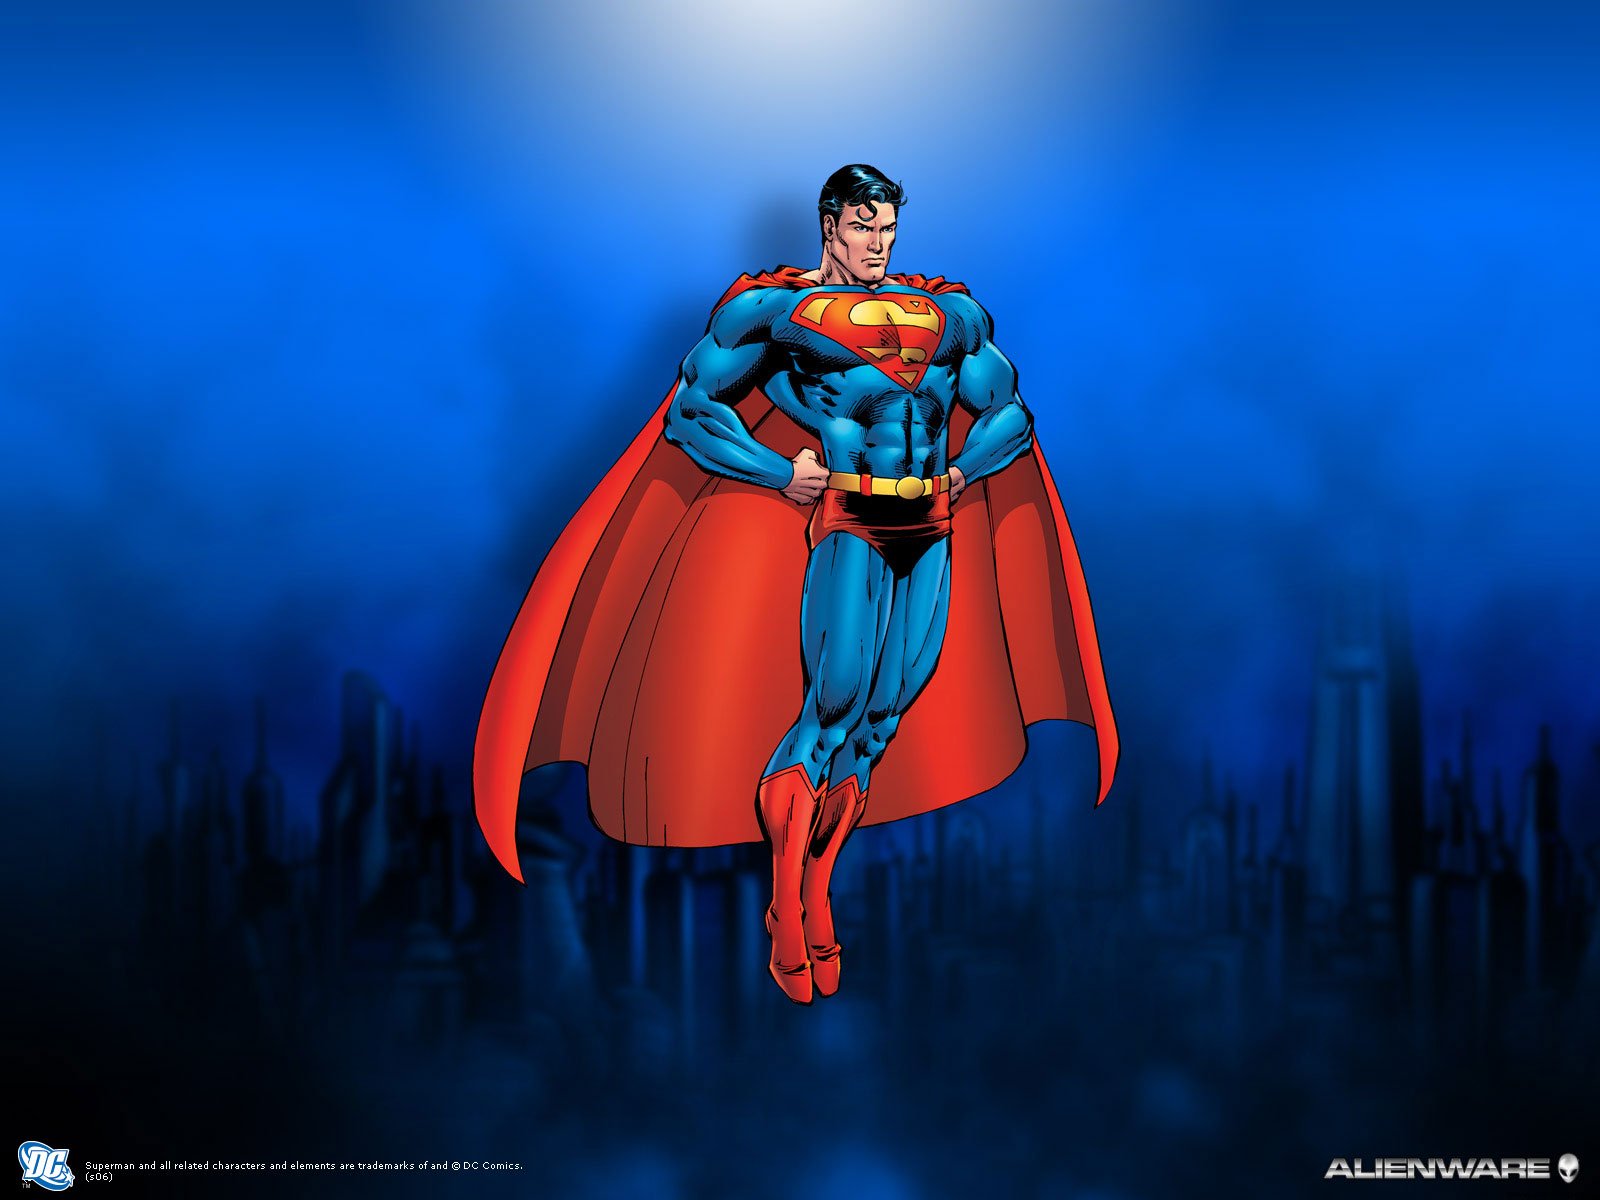 Awesome superman background